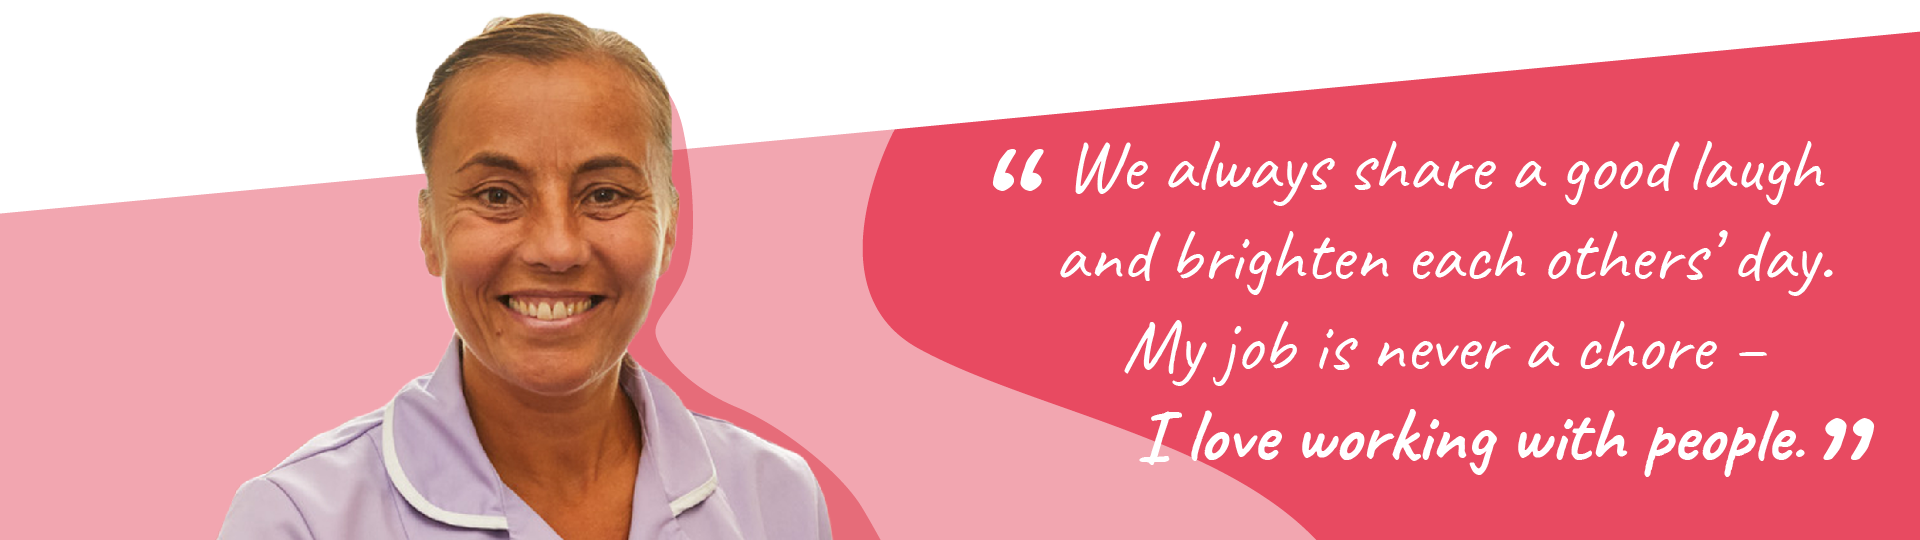 Client and quote banner image